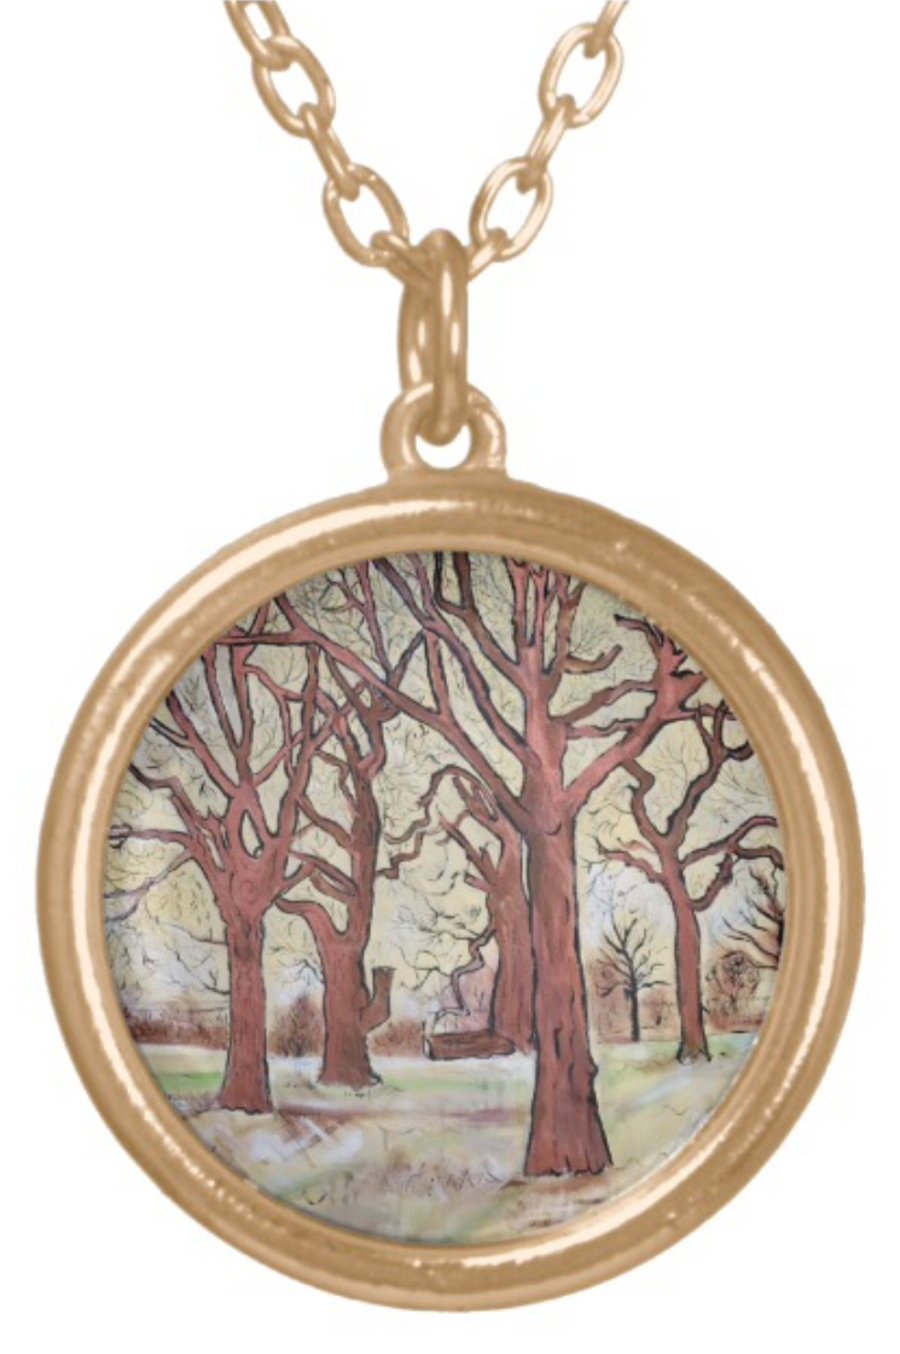 Beautiful Pendant featuring the design ‘The Trees In The Field Clap Their Hands’